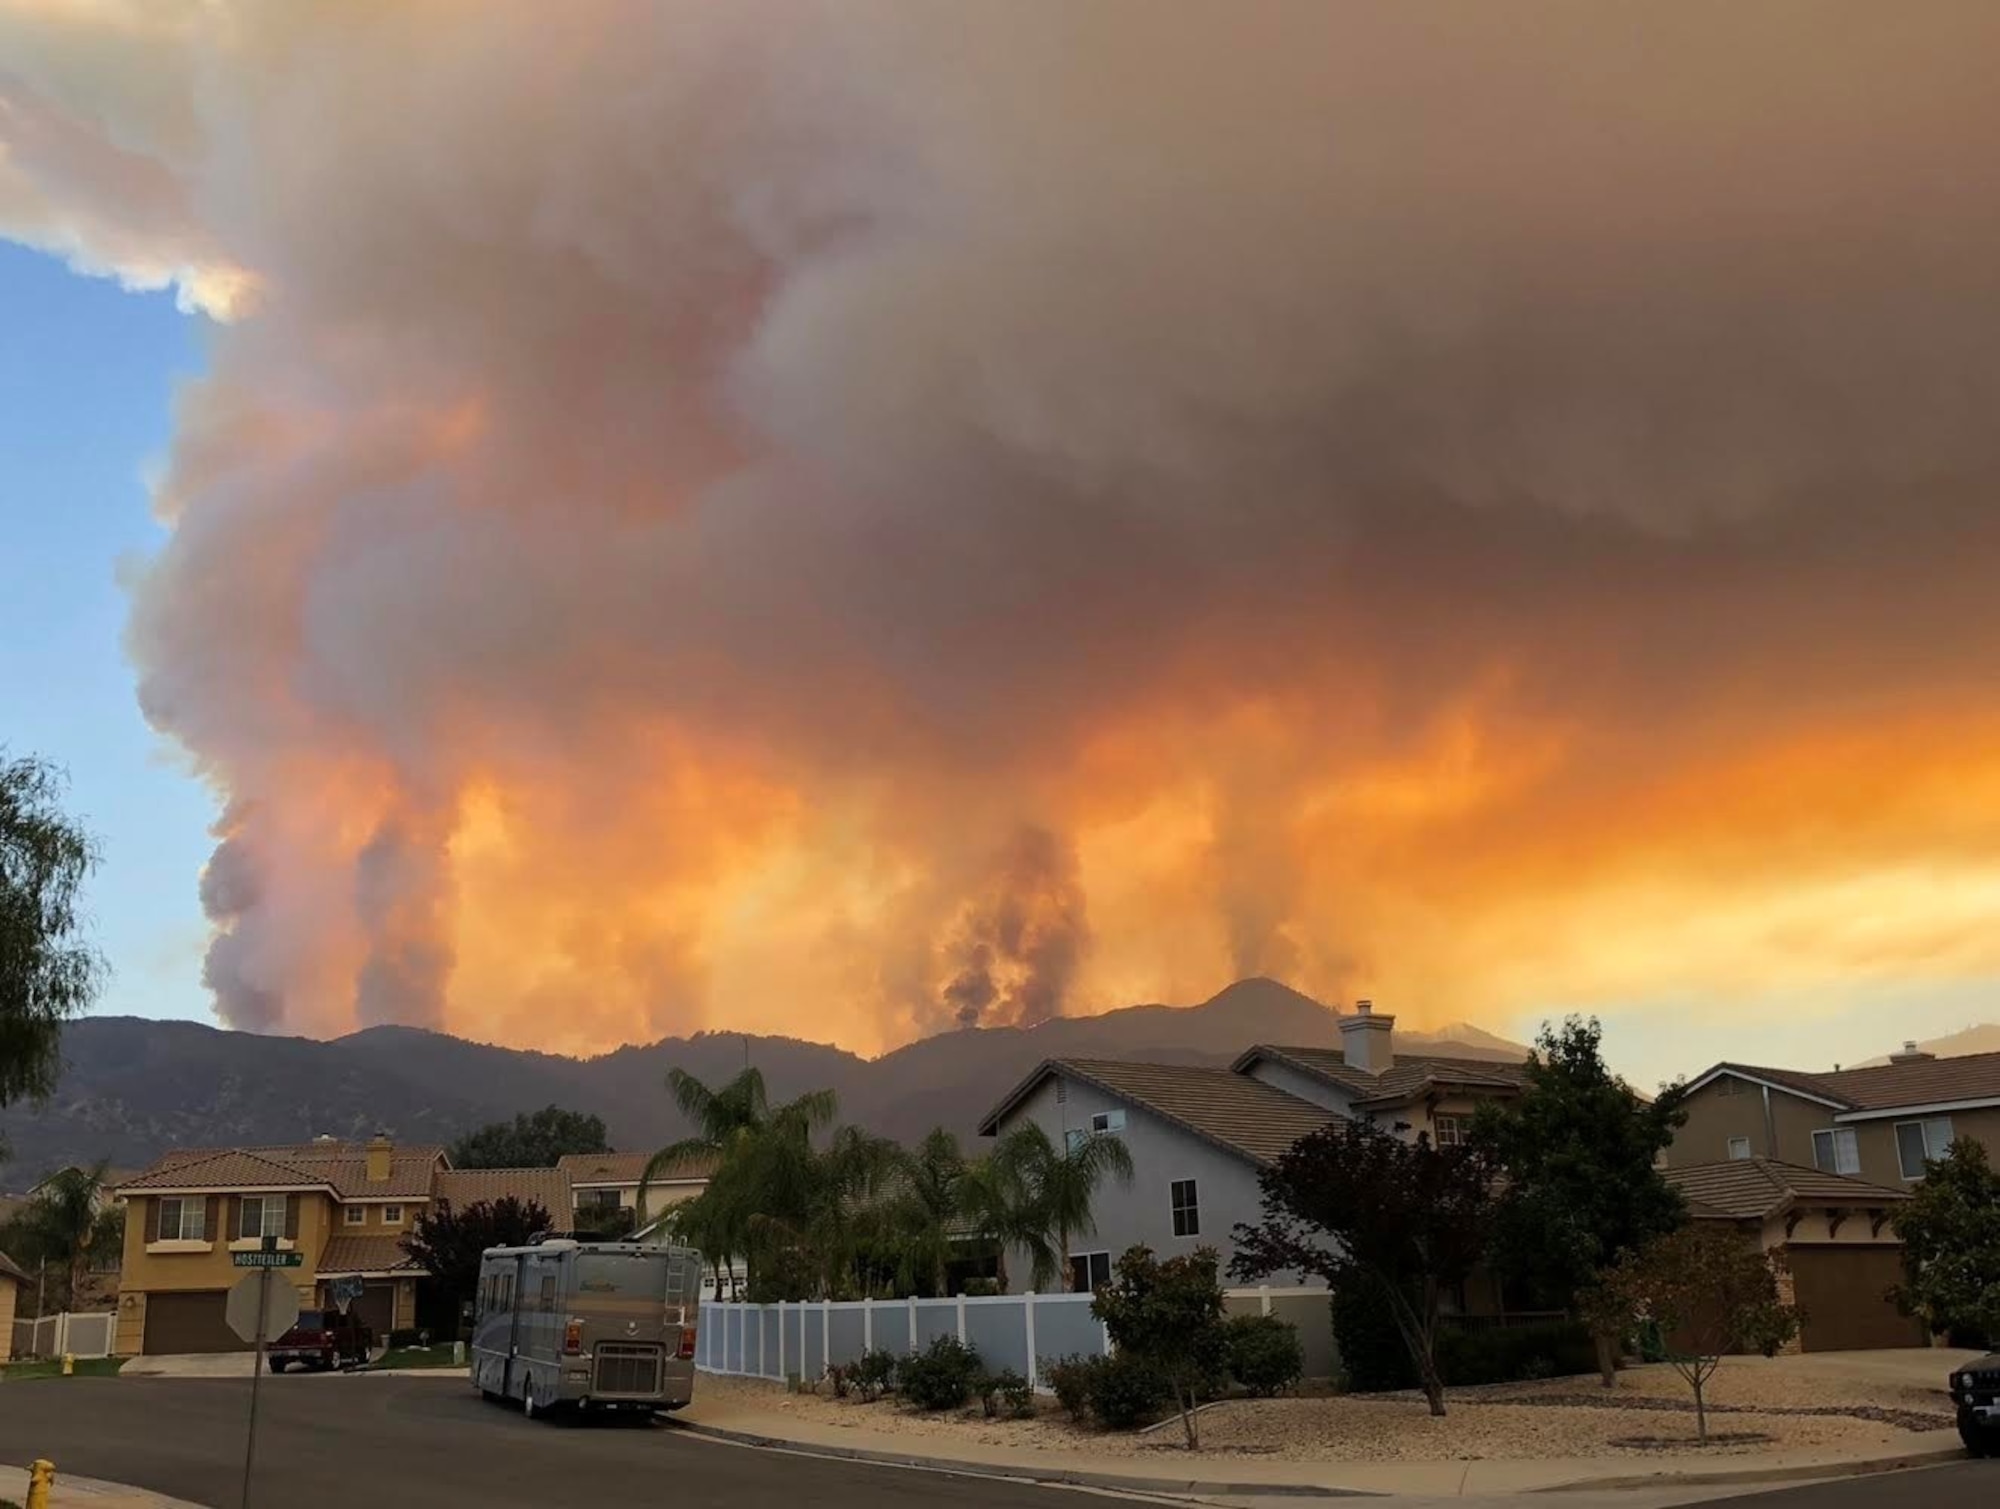 Wildfire rages along skyline behind a residential area.